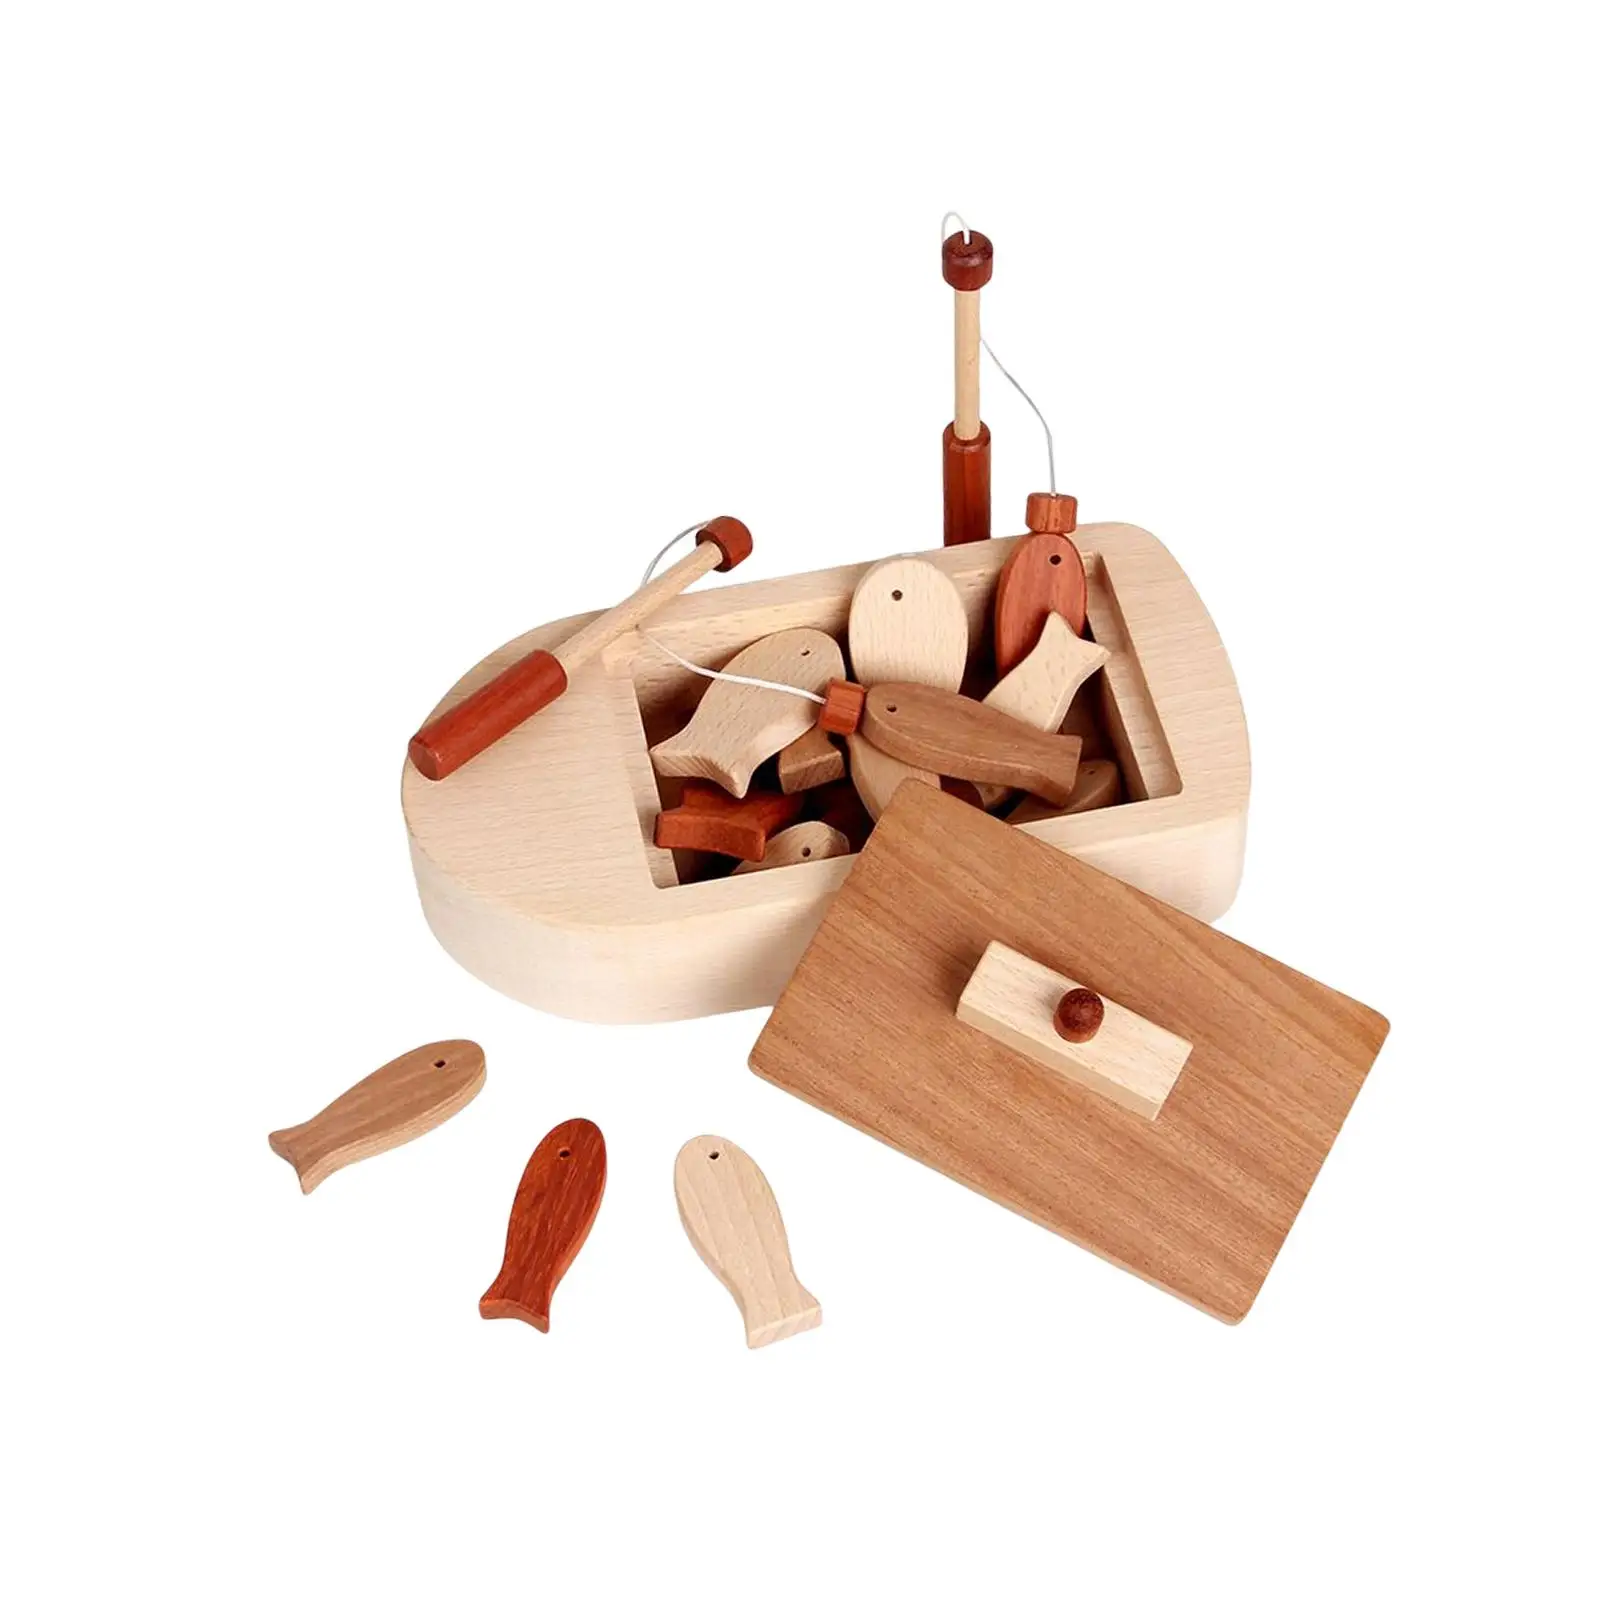 Wooden Fishing Game Play Set Developmental Toys Pretend Play Fine Motor Skill Early Educational Counting Toys for Toddler